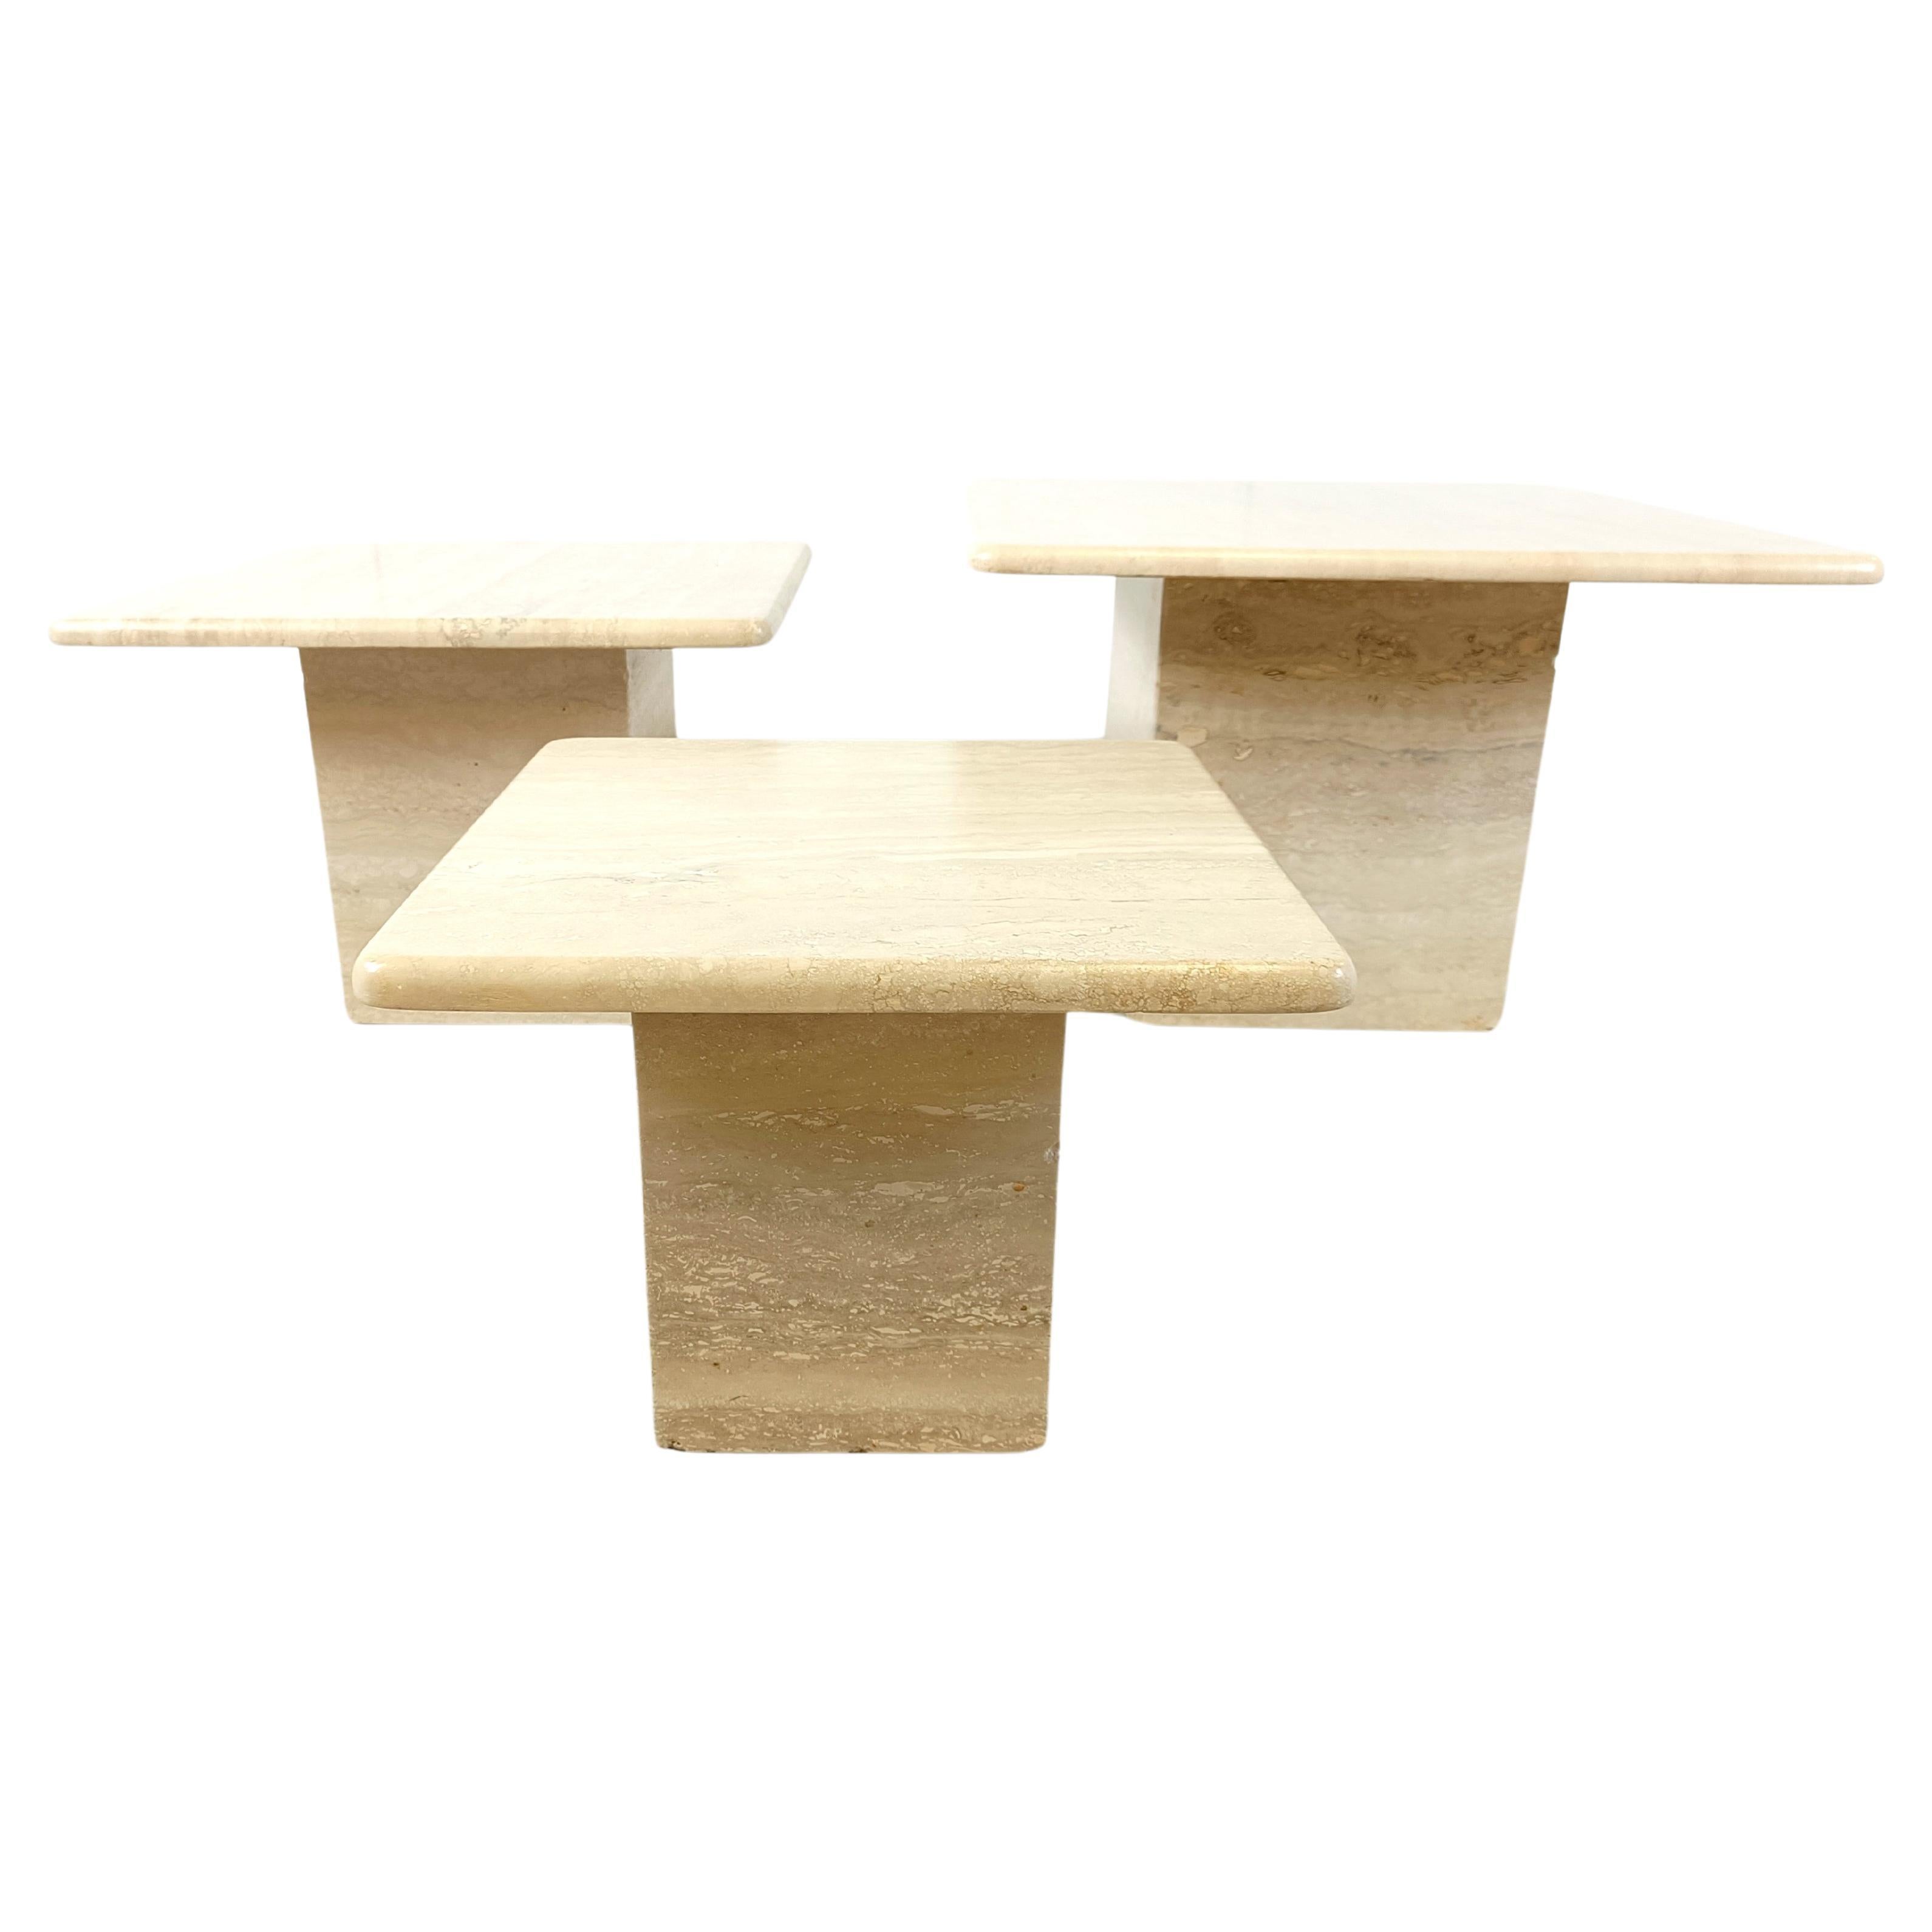 Vintage travertine nesting tables or side tables, 1970s